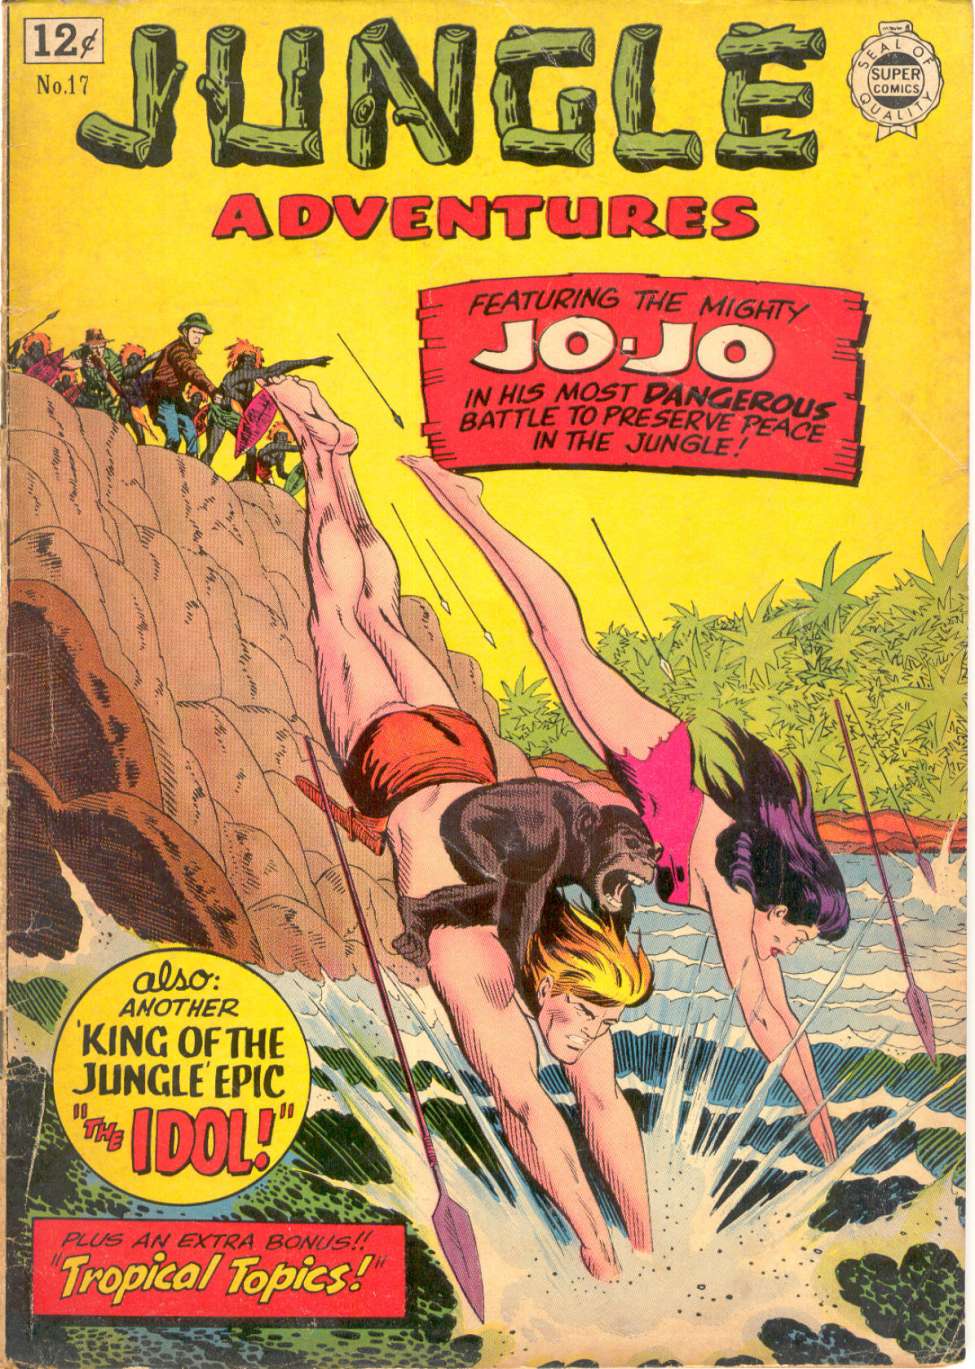 Book Cover For Jungle Adventures 17 - Version 2